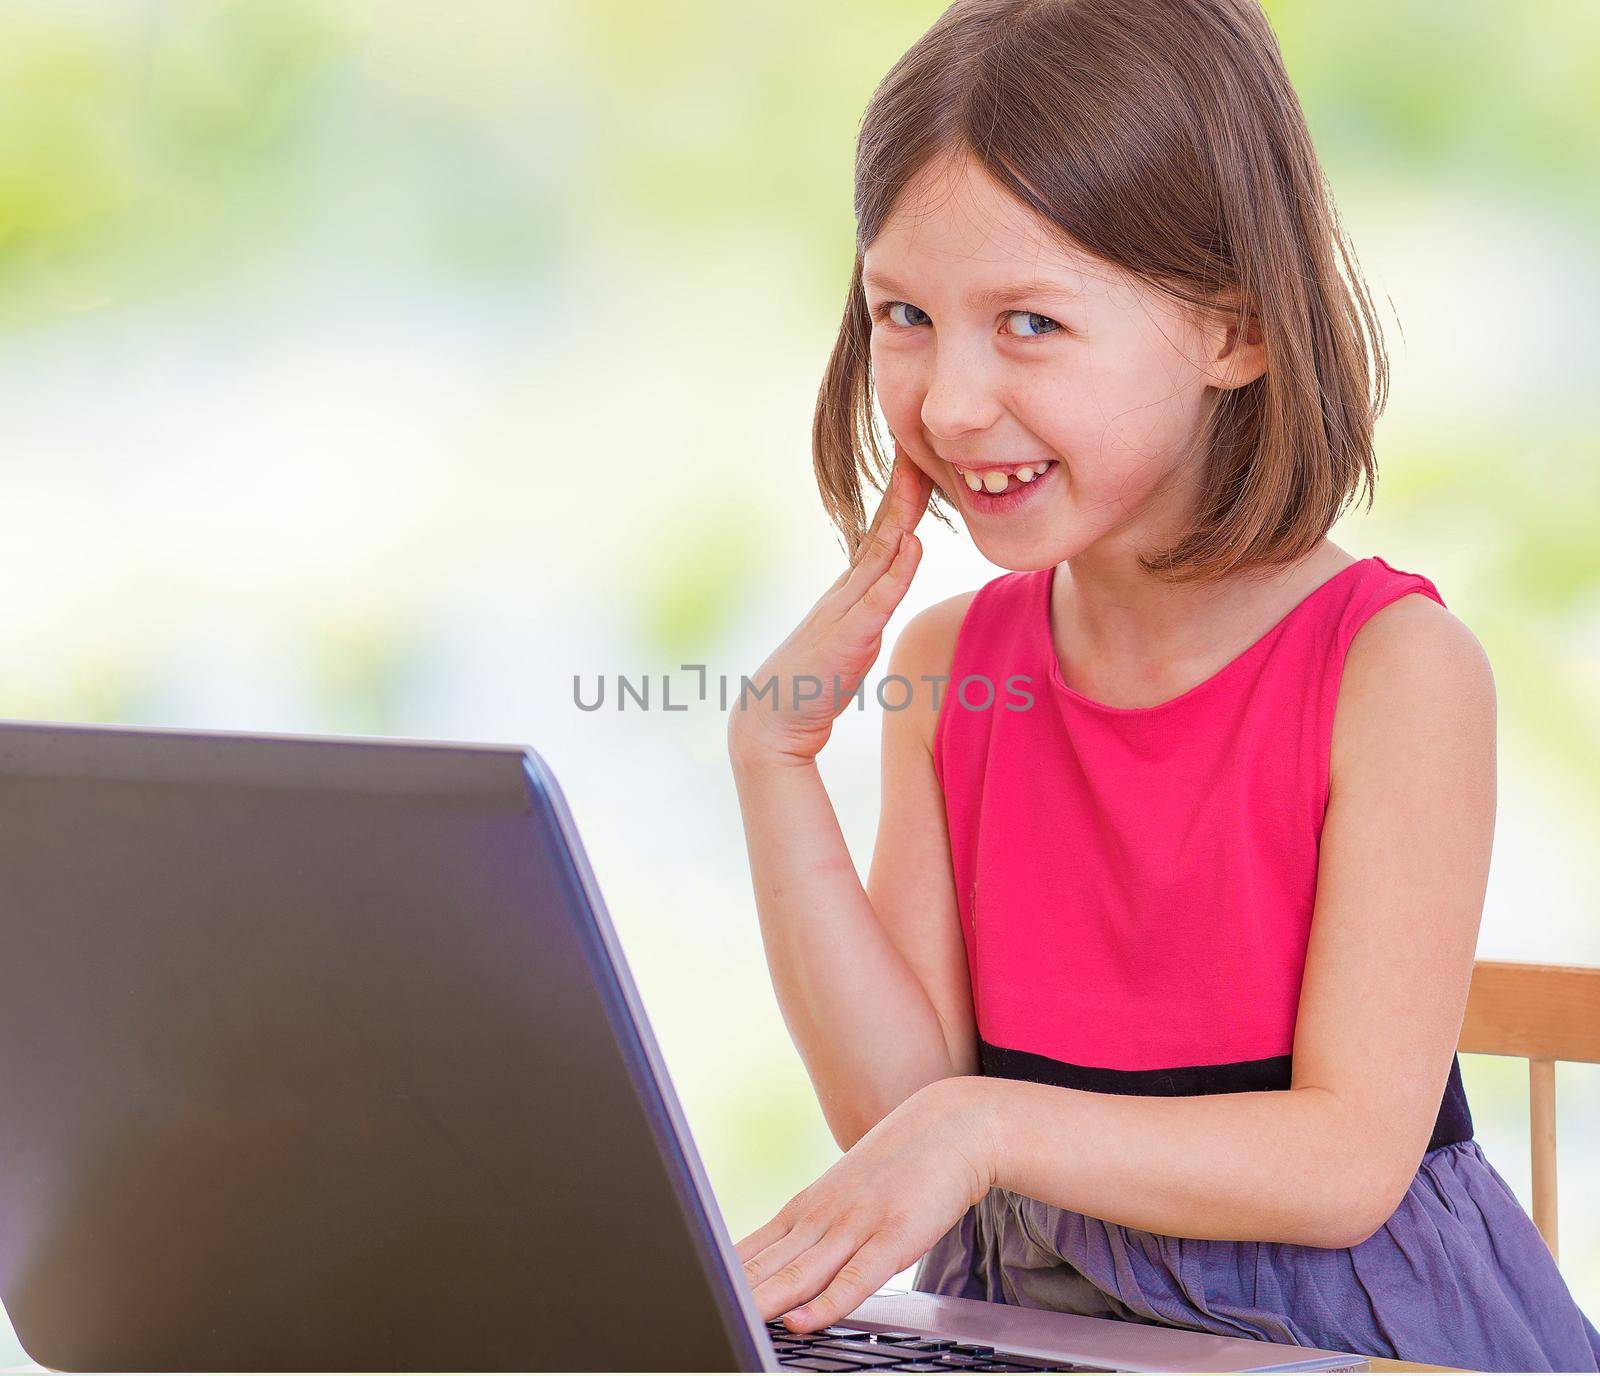 Little girl laughs looking at laptop screen.